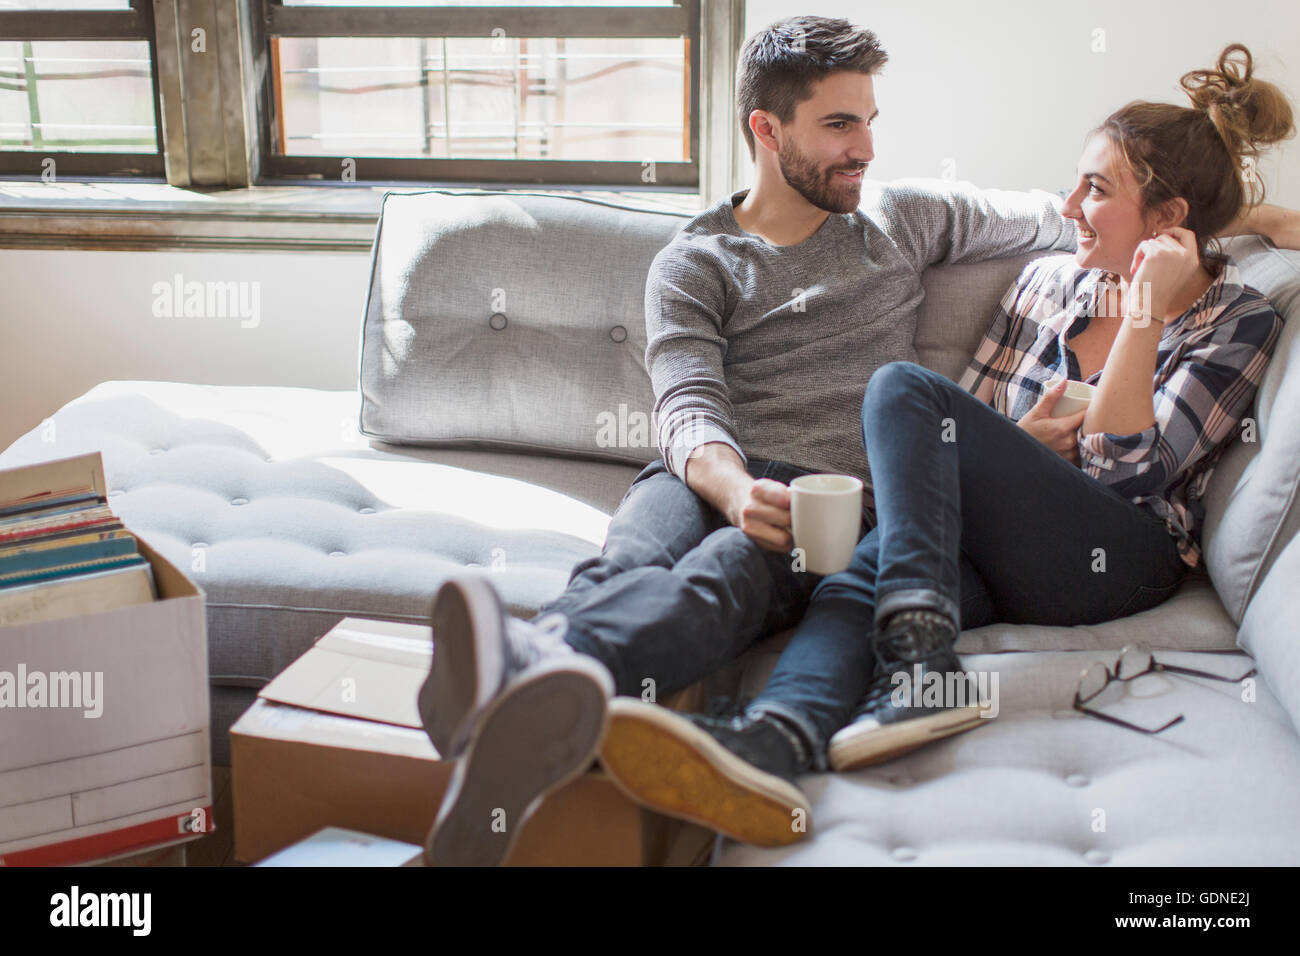 Moving house: Young couple relaxing on sofa surrounded by cardboard boxes Stock Photo